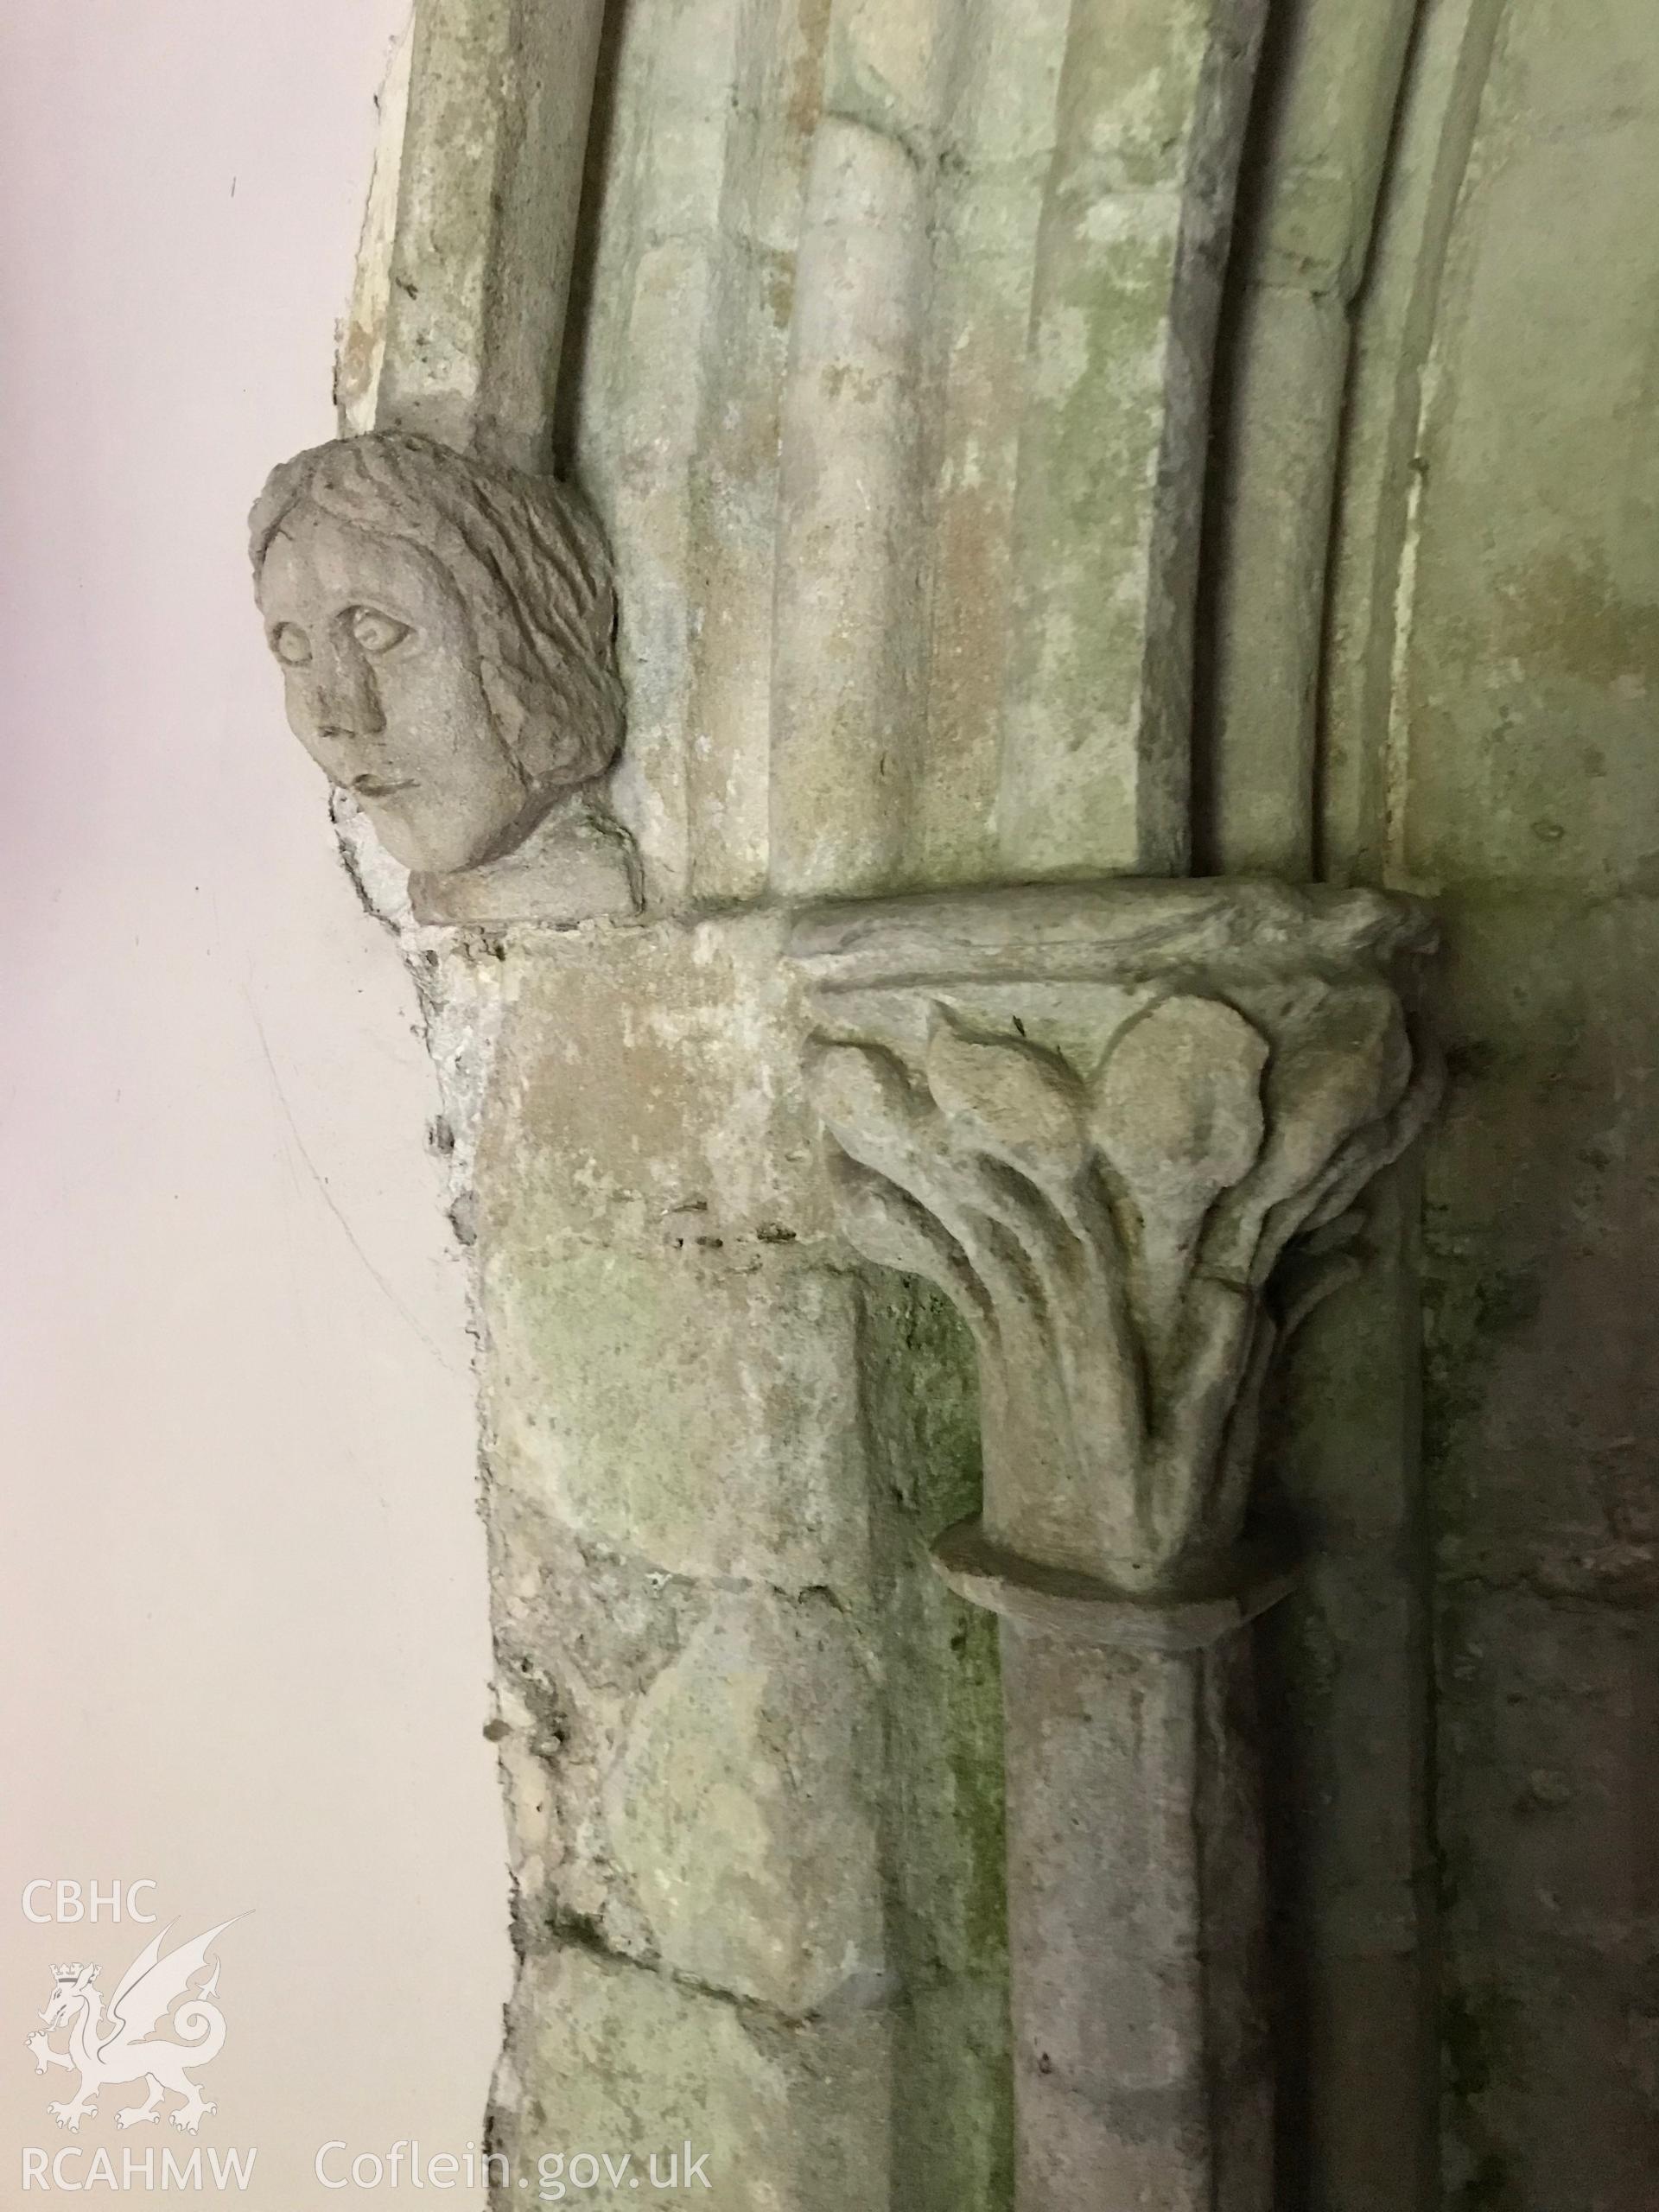 Colour photo showing carved detail of archway at St. Cadog's Church, Cheriton, taken by Paul R. Davis, 19th May 2018.